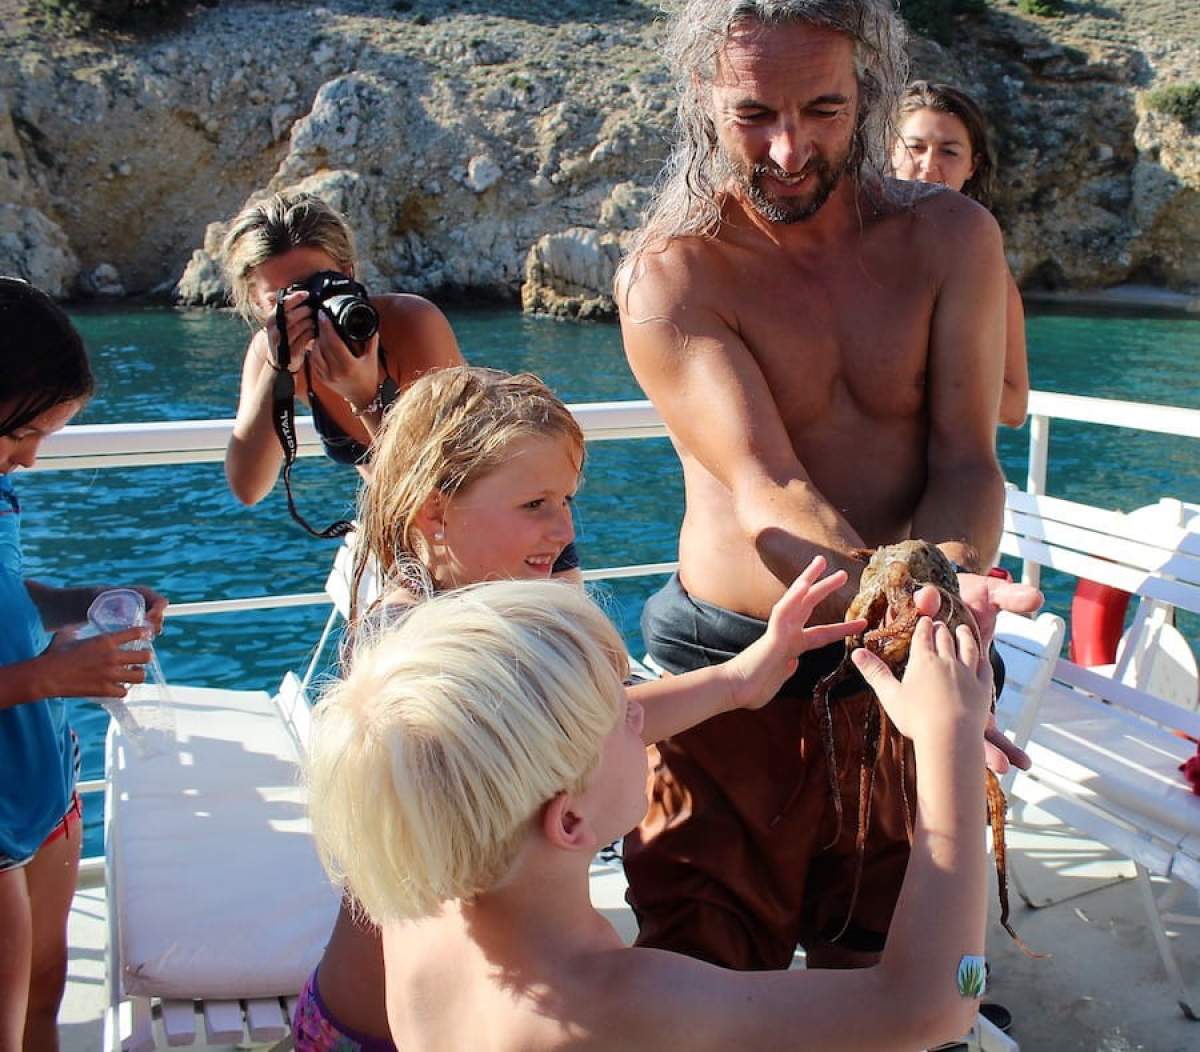 A family vacation on the island of Krk offers many fun activities